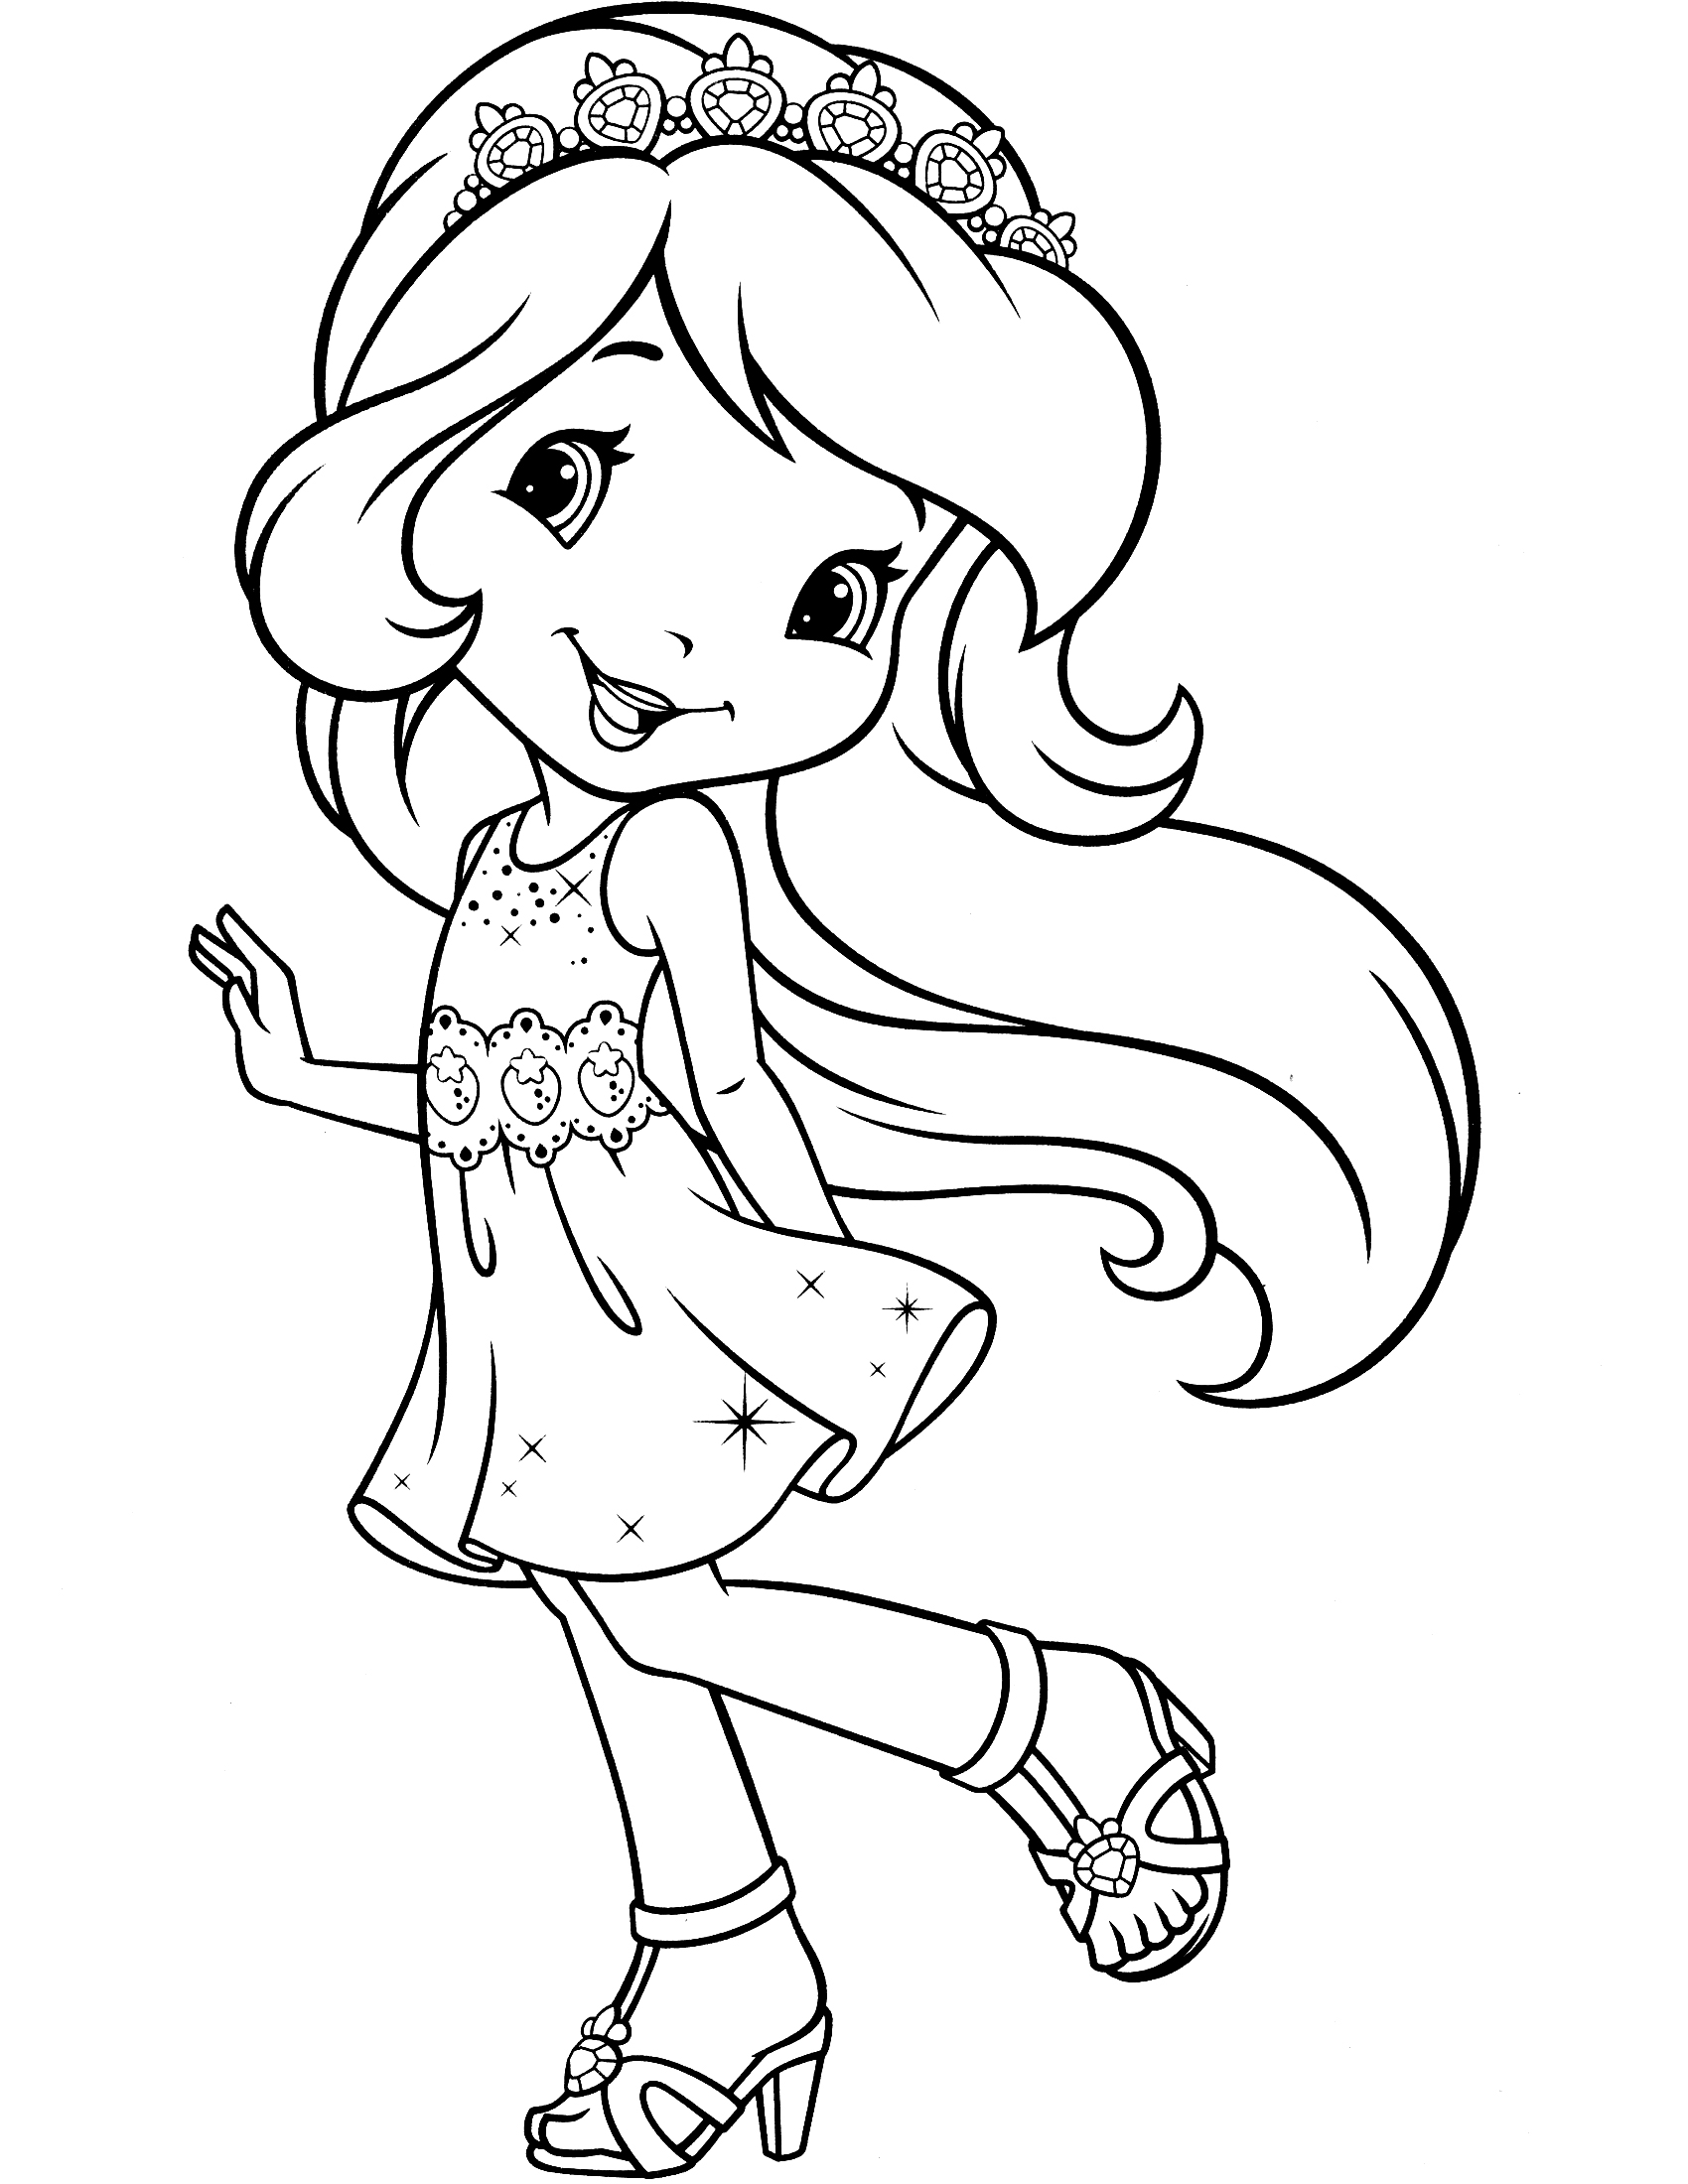  Strawberry Shortcake Coloring Pages / Cool coloring pages / 15